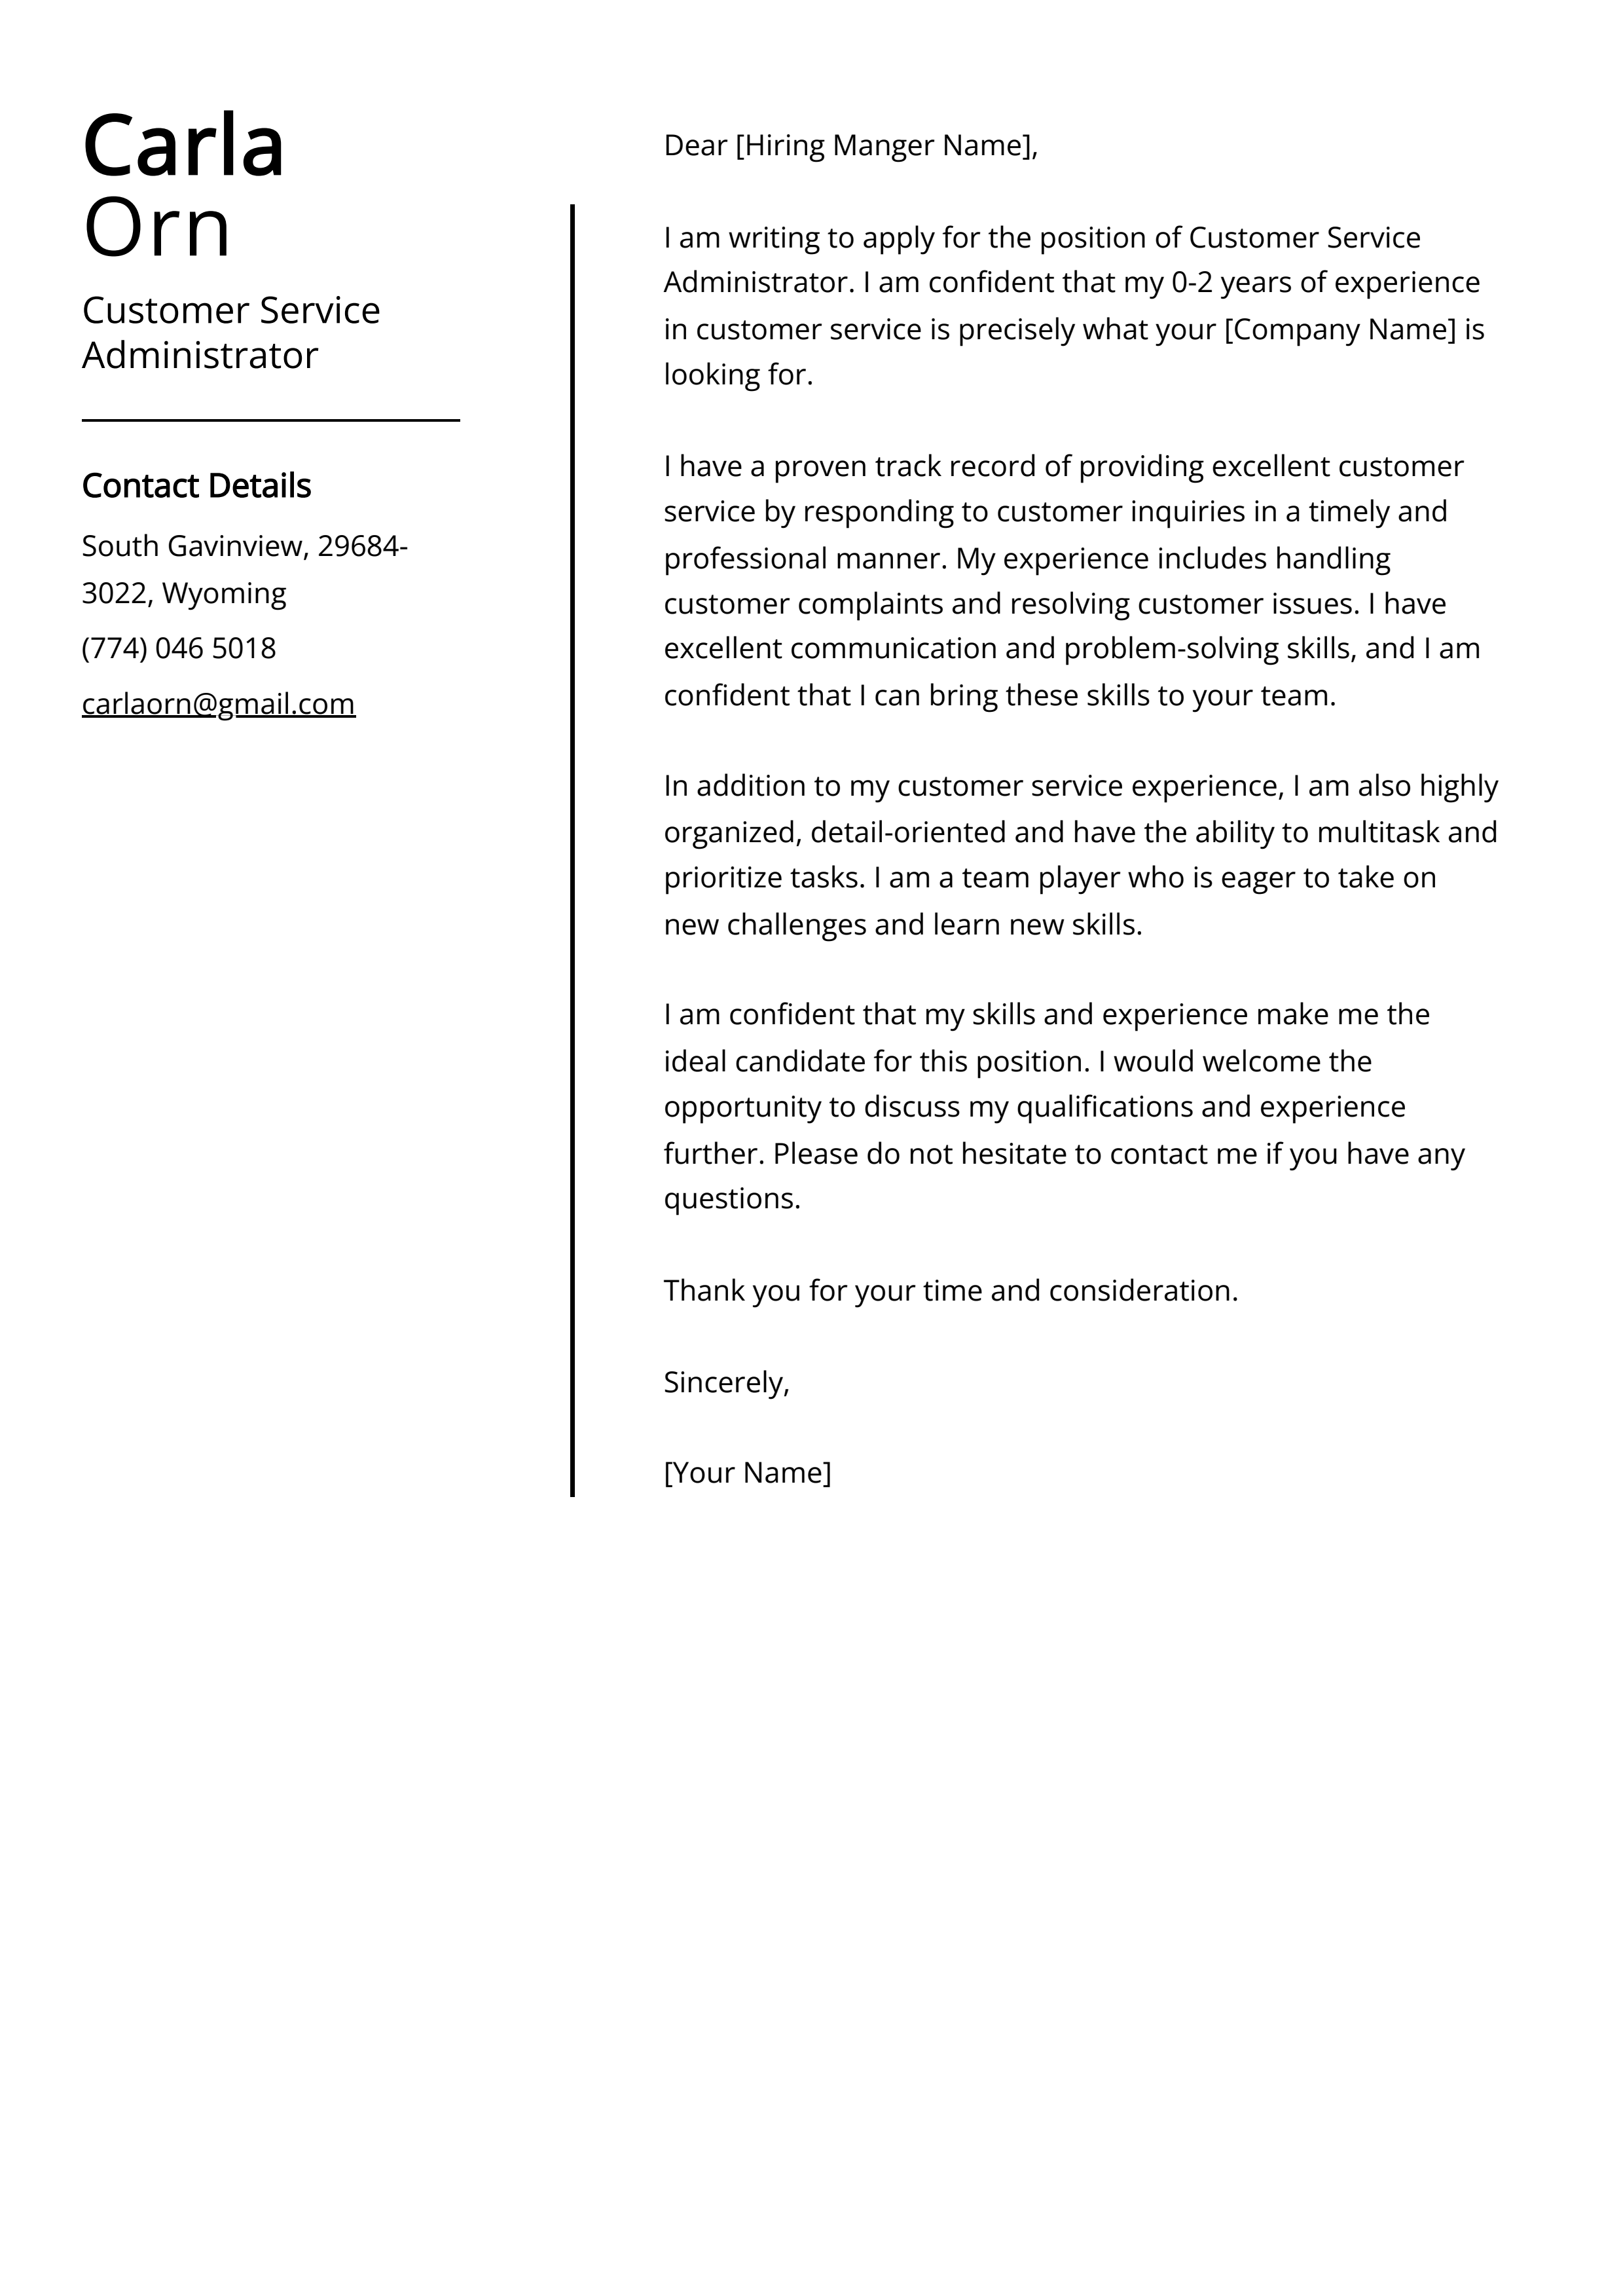 Customer Service Administrator Cover Letter Example